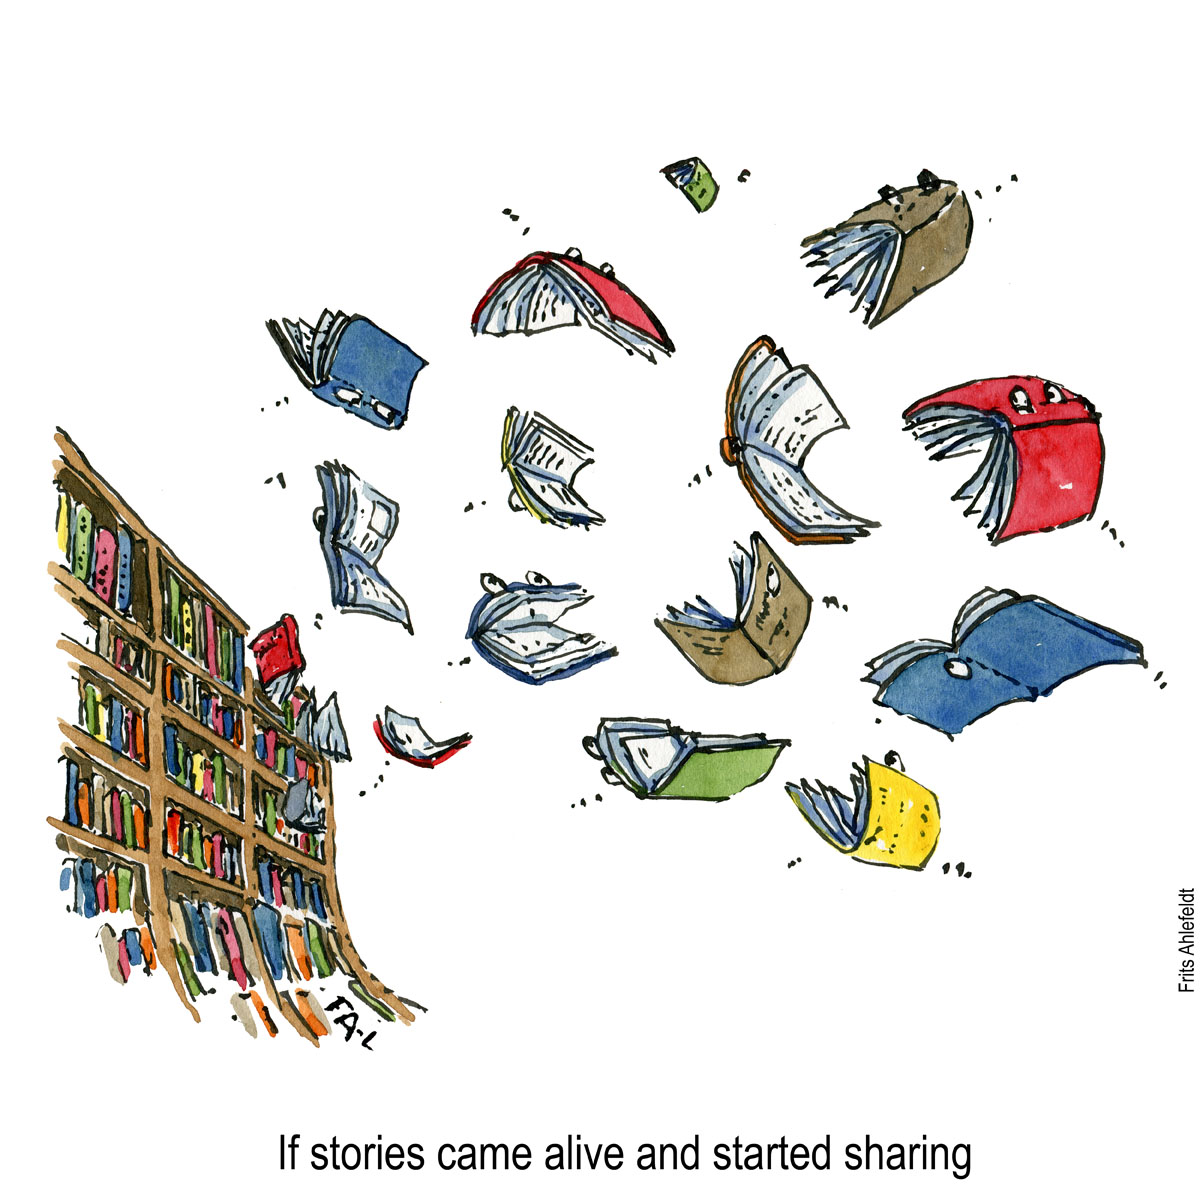 Illustration of a bookshelf with books flying out talking to each other. Drawing by Frits Ahlefeldt - texted